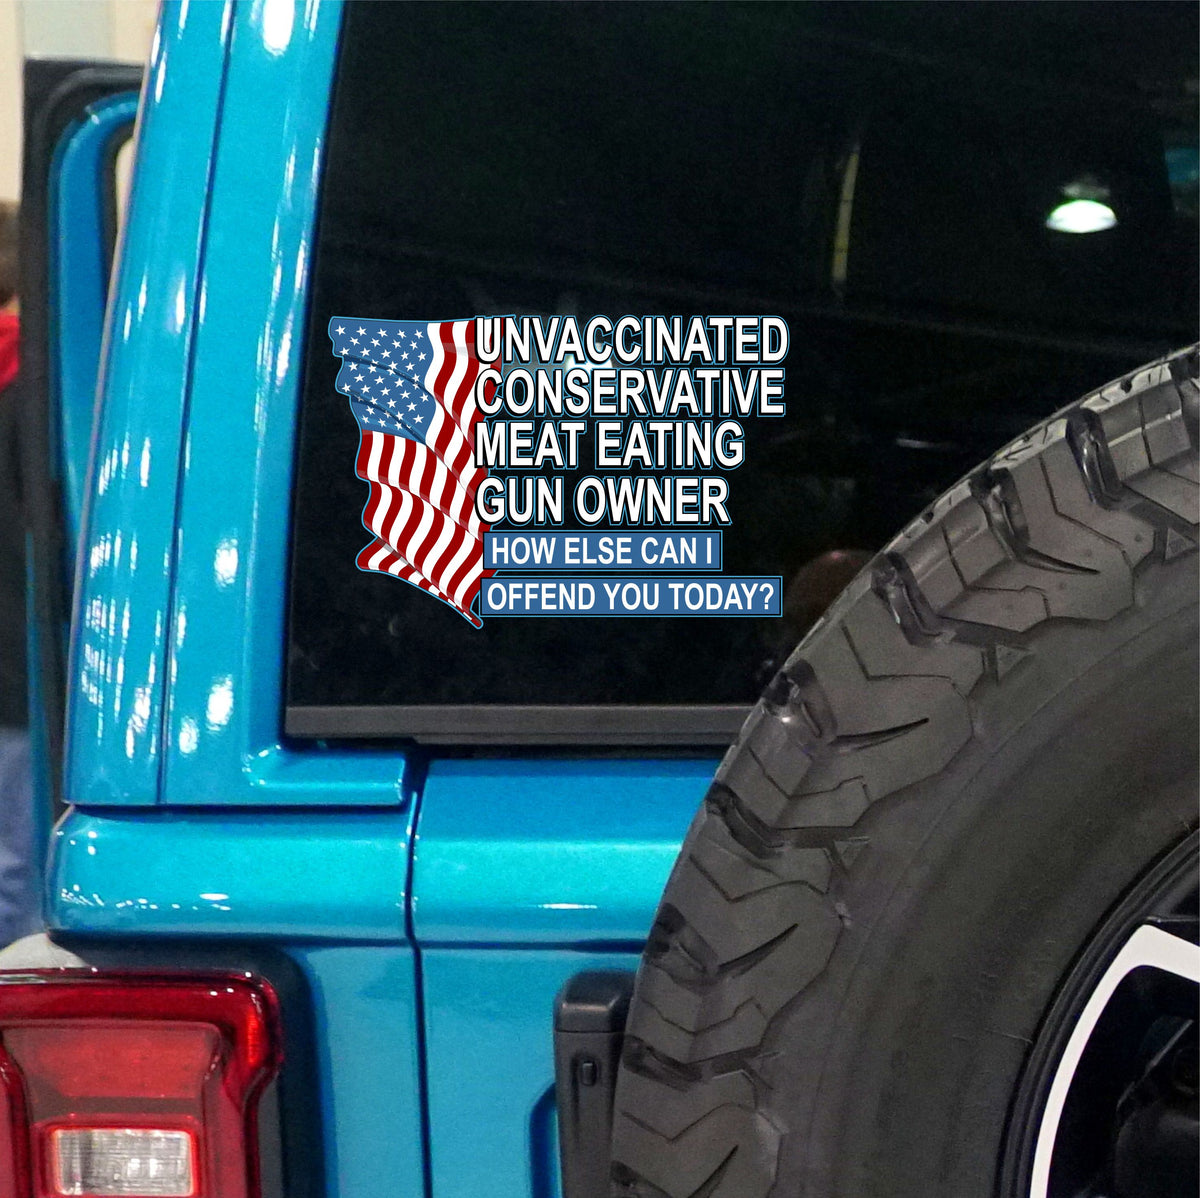 Unvaccinated - Conservative - Offend You Today - PermaSticker - UV Inks - Free Shipping